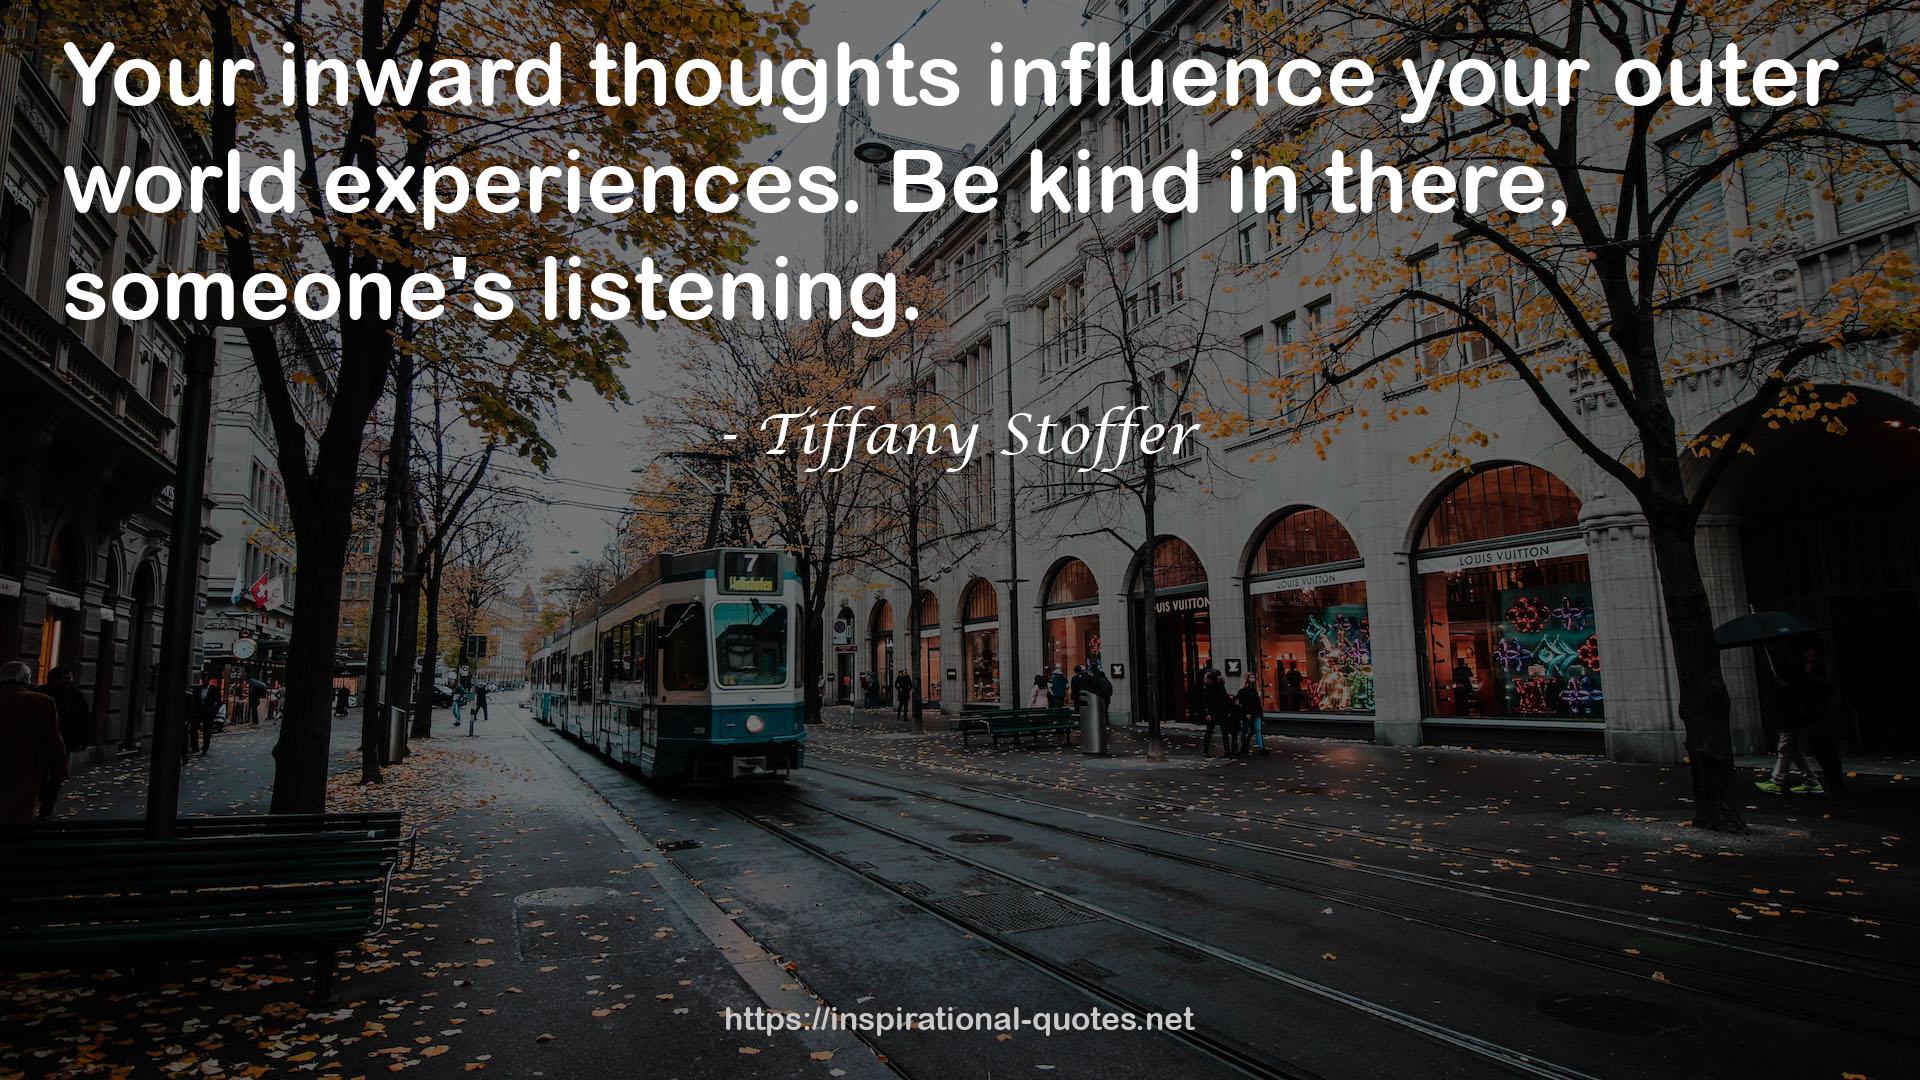 Tiffany Stoffer QUOTES